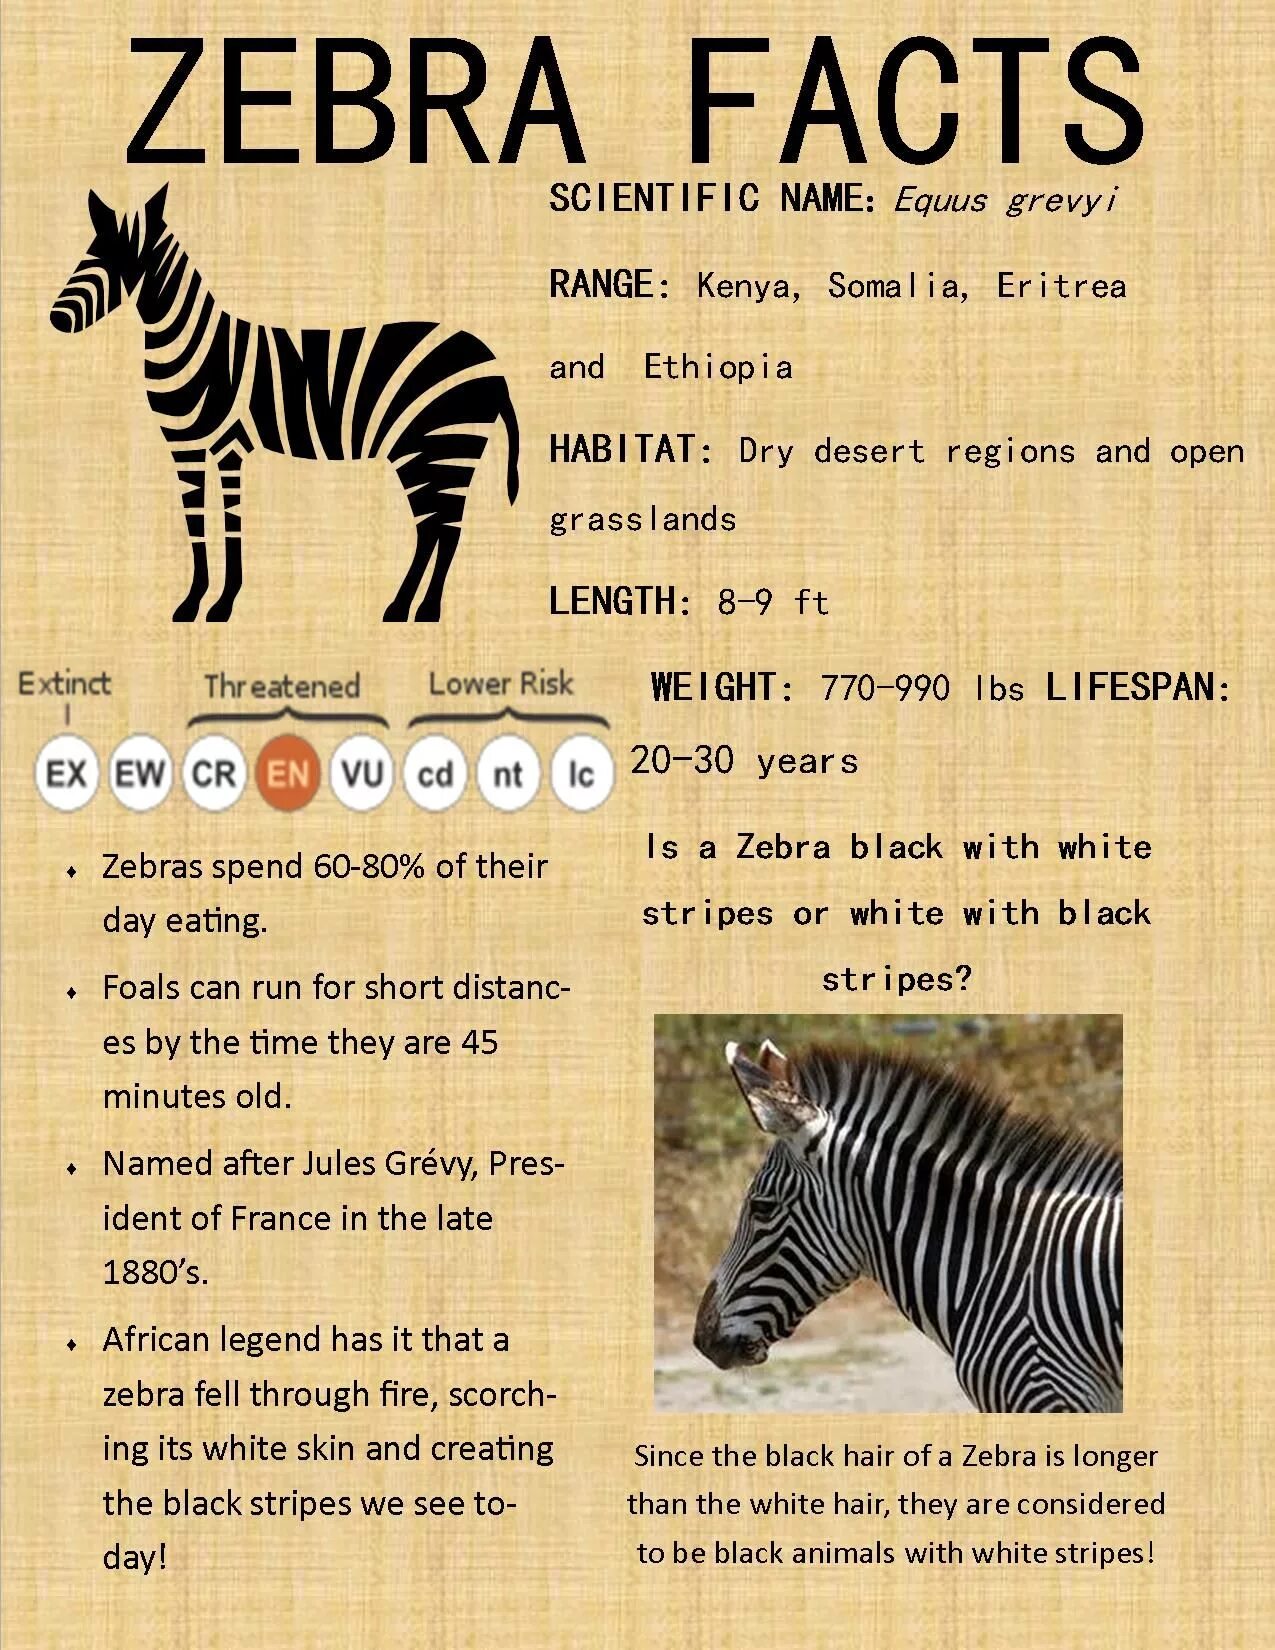 Facts about animals. Interesting facts about animals for children. Animals for Kids facts. Zebra interesting facts. Interesting facts for Kids.